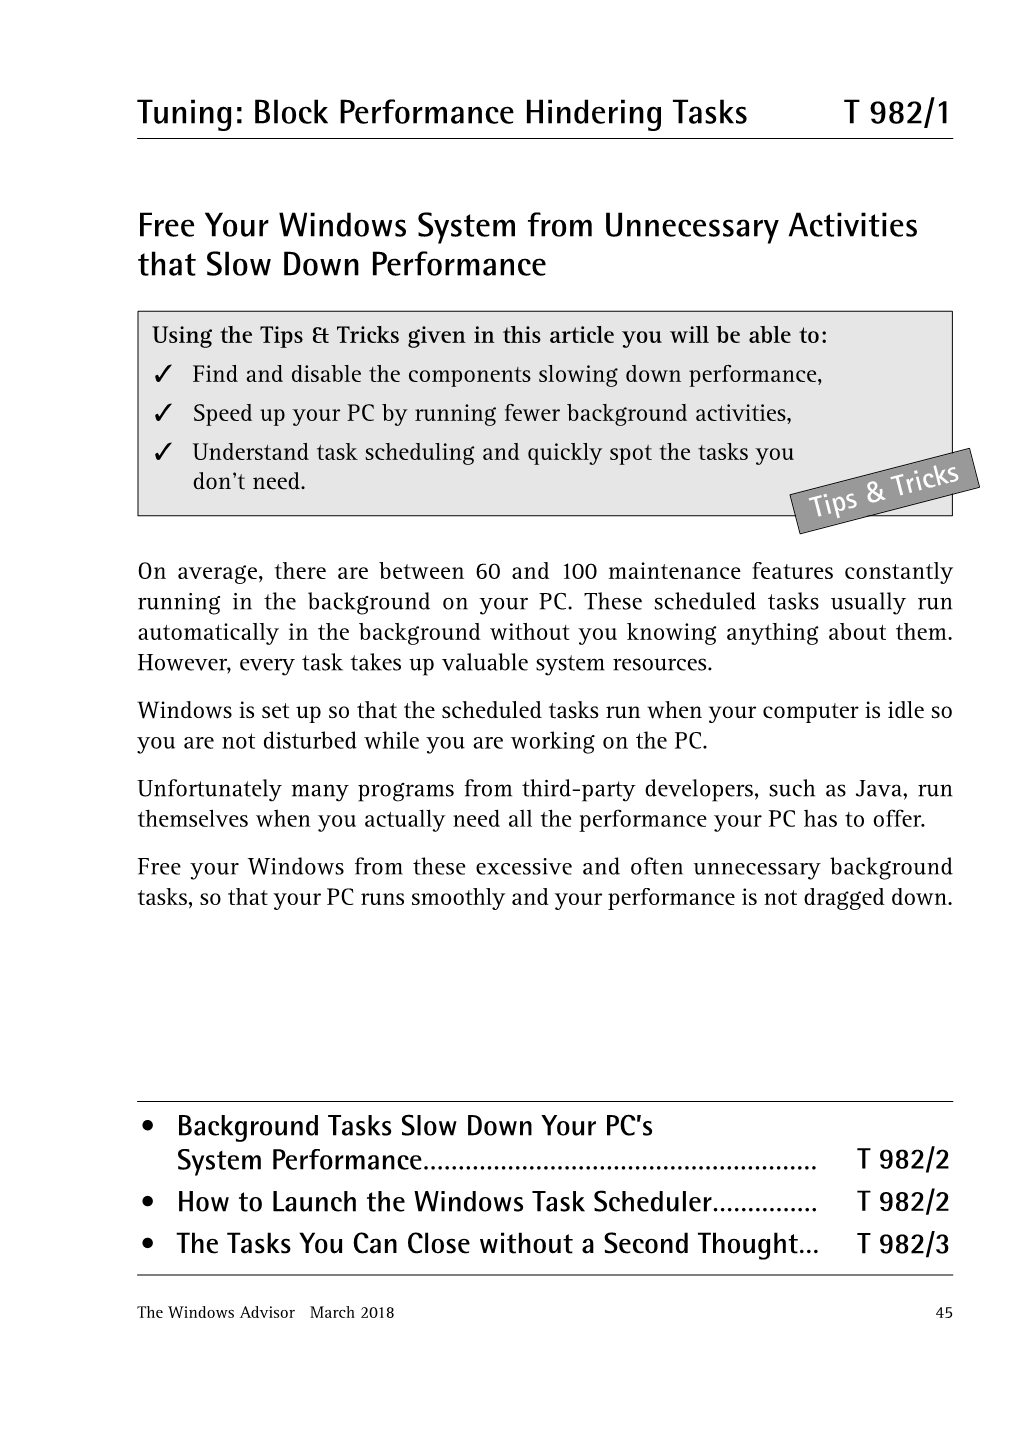 Free Your Windows System from Unnecessary Activities That Slow Down Performance T 982/1 Tuning: Block Performance Hindering Ta